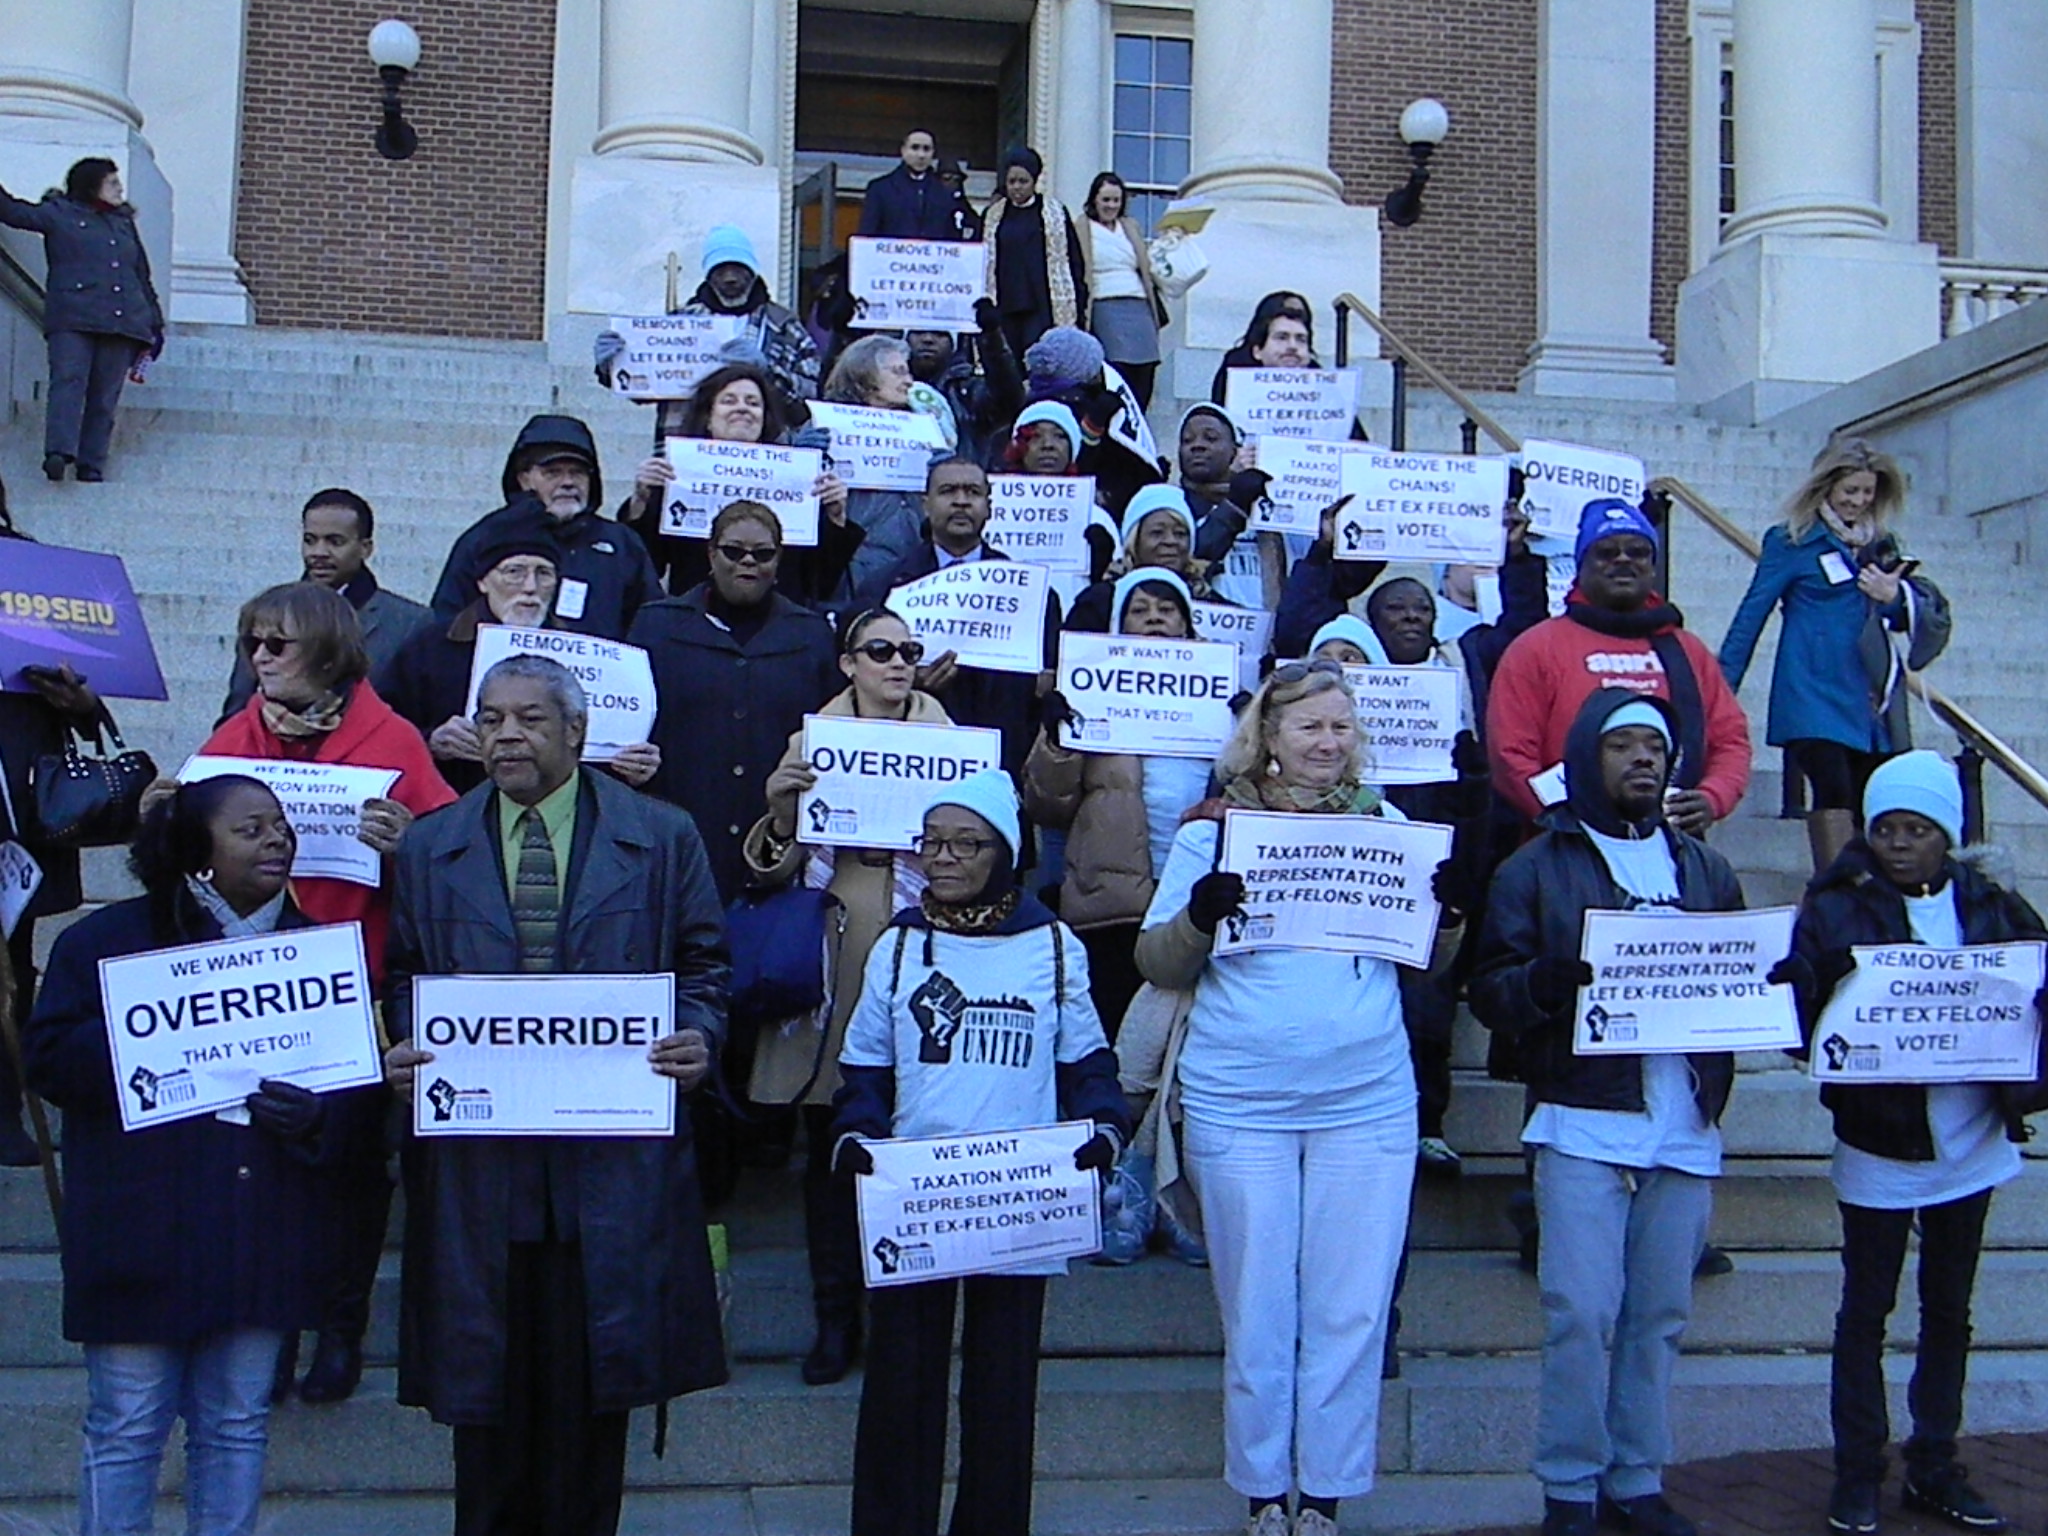 Protestors gathered on the steps of the Maryland State House in Annapolis, Maryland, on January 14, 2016, to advocate for the right of ex-felons to vote. (Capital News Service photo by Josh Magness.)